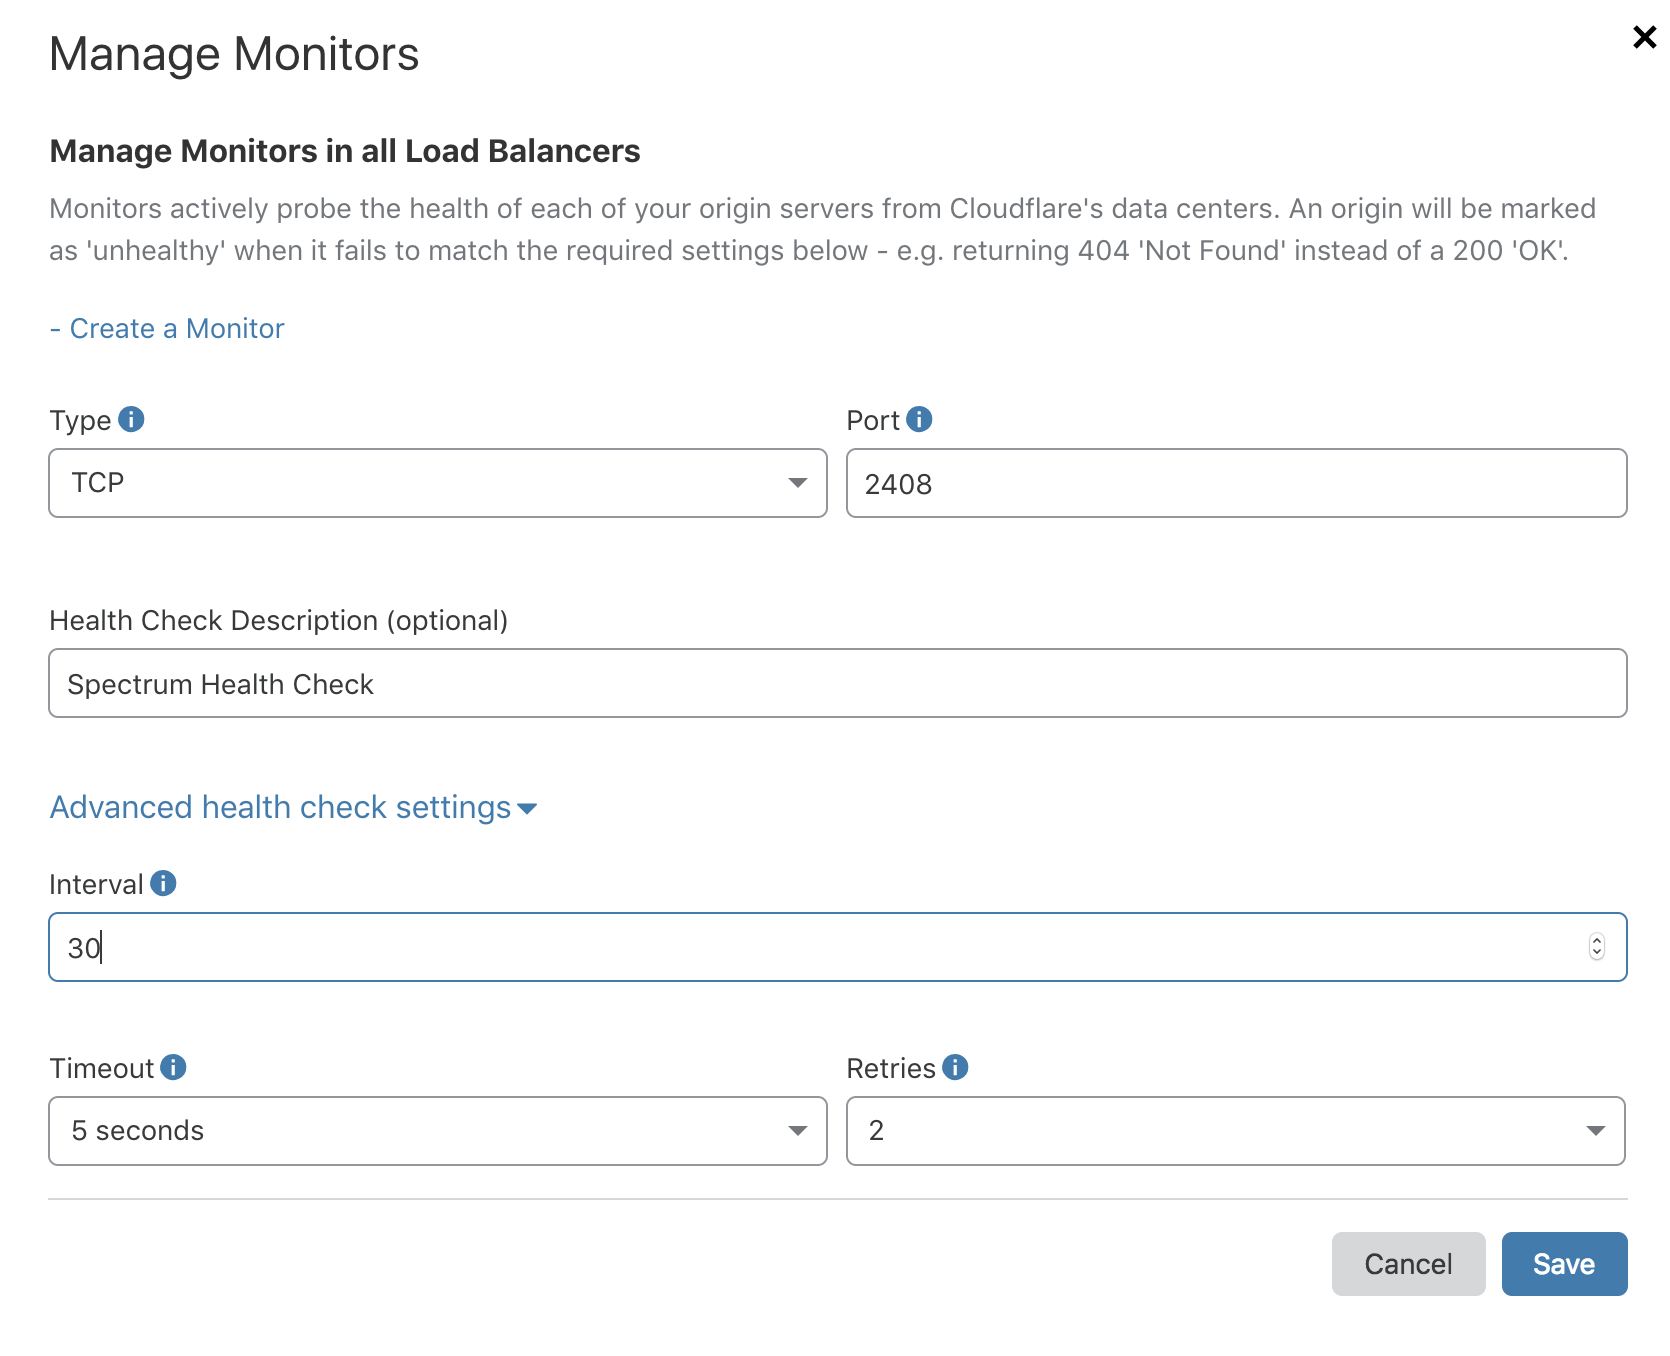 Manage monitors dialog with TCP health check running on port 2408 and a 30 second refresh rate